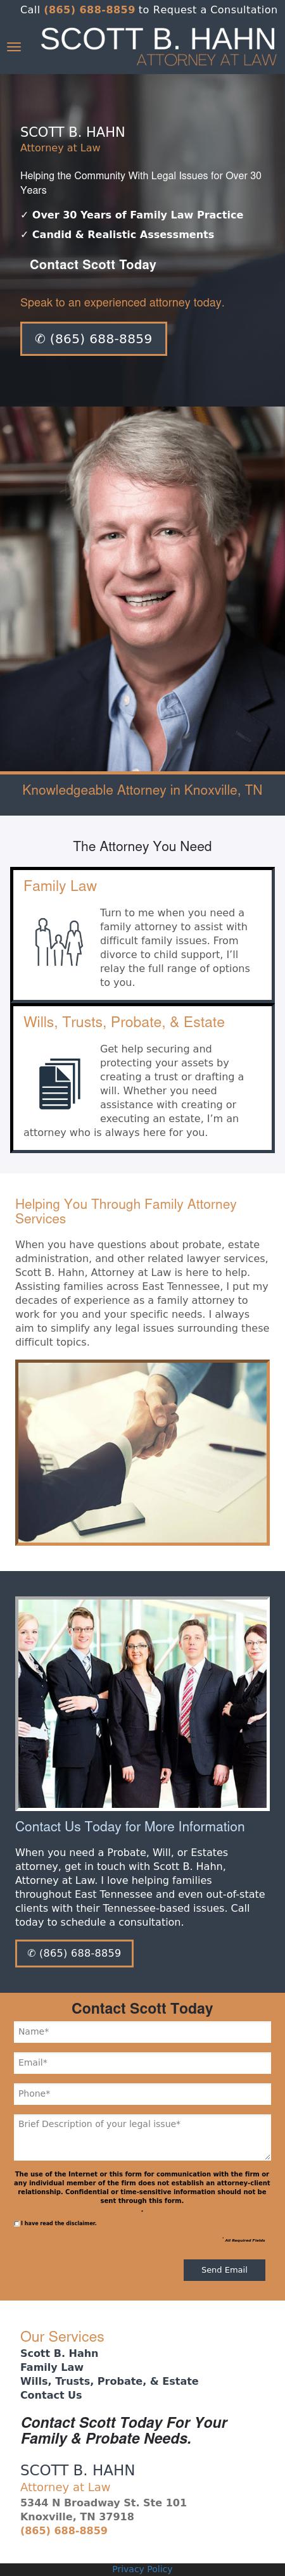 Scott B. Hahn, Attorney at Law - Knoxville TN Lawyers